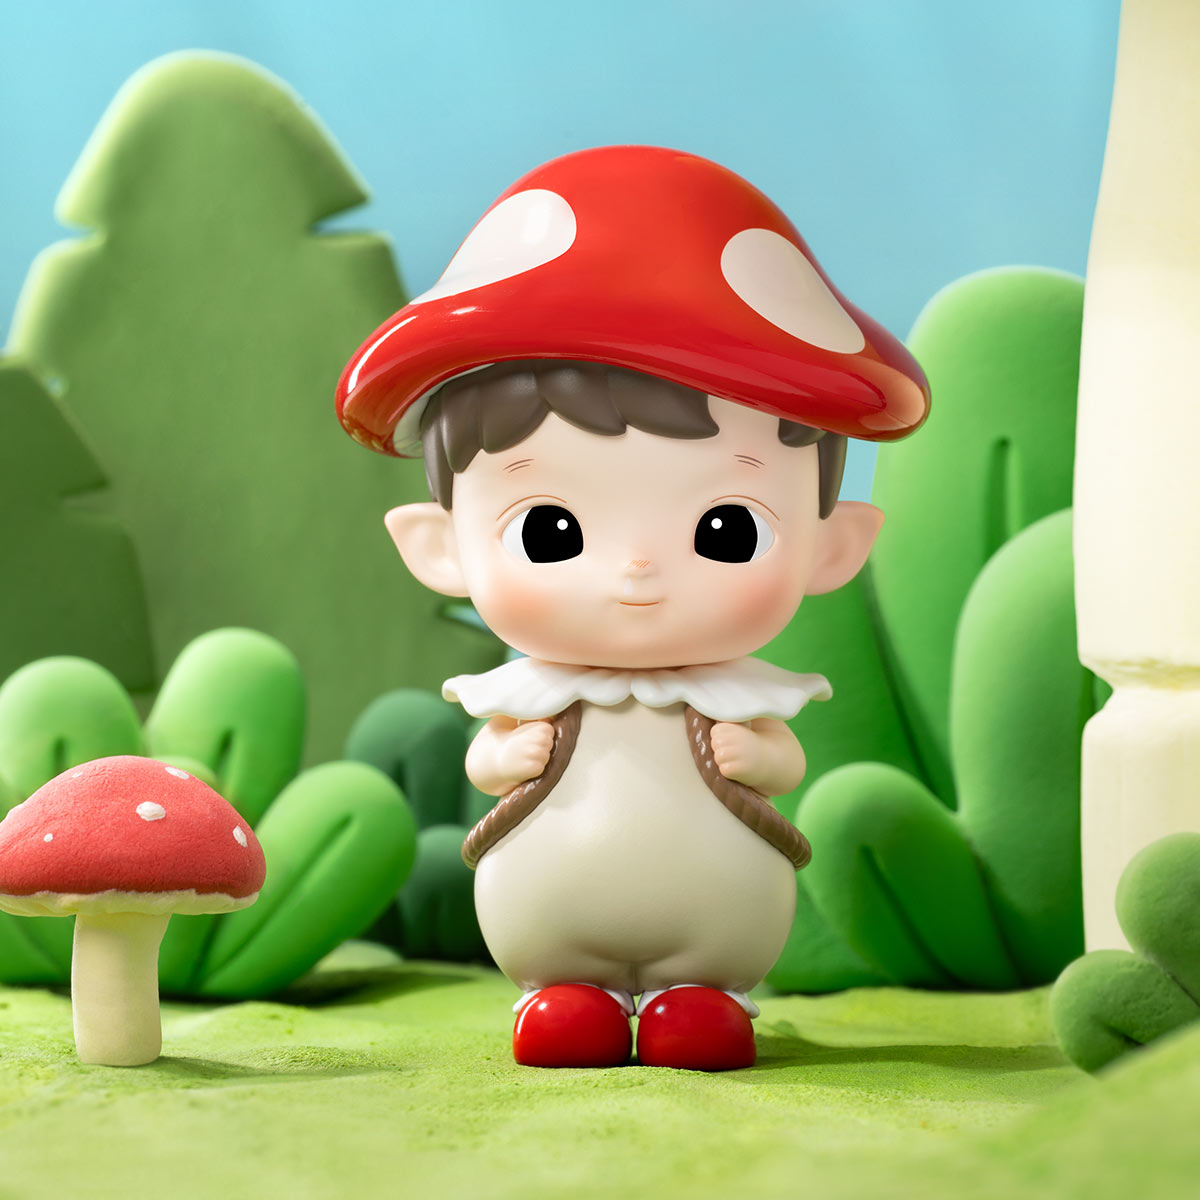 A blind box toy series, HACIPUPU Adventures In The Woods Box, featuring a boy figurine in a mushroom garment. Includes 12 regular designs and 1 secret.